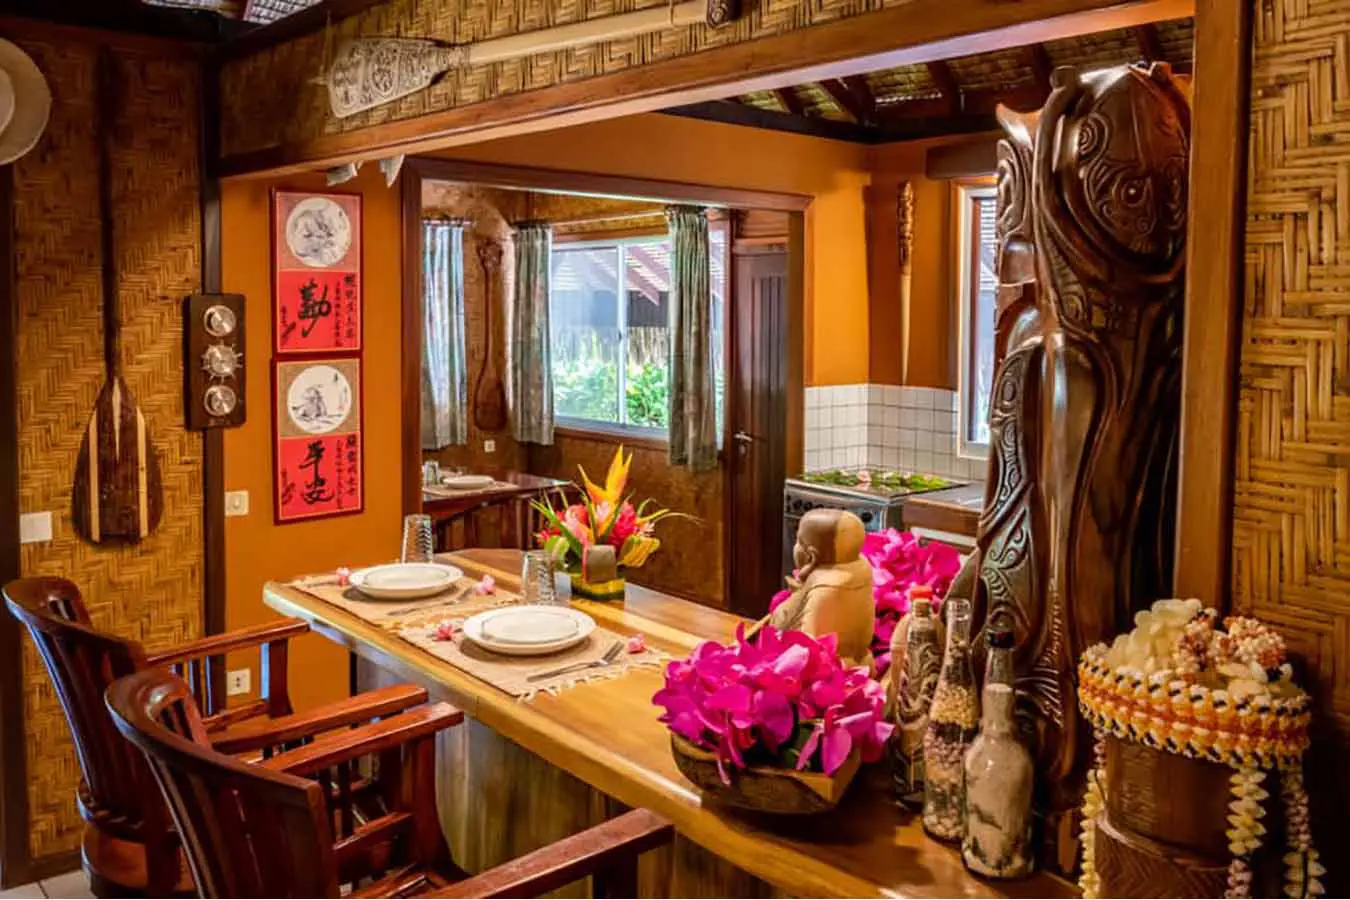 Wood with Tahitian sculptures next to the kitchen in the Bora Bora vacation home